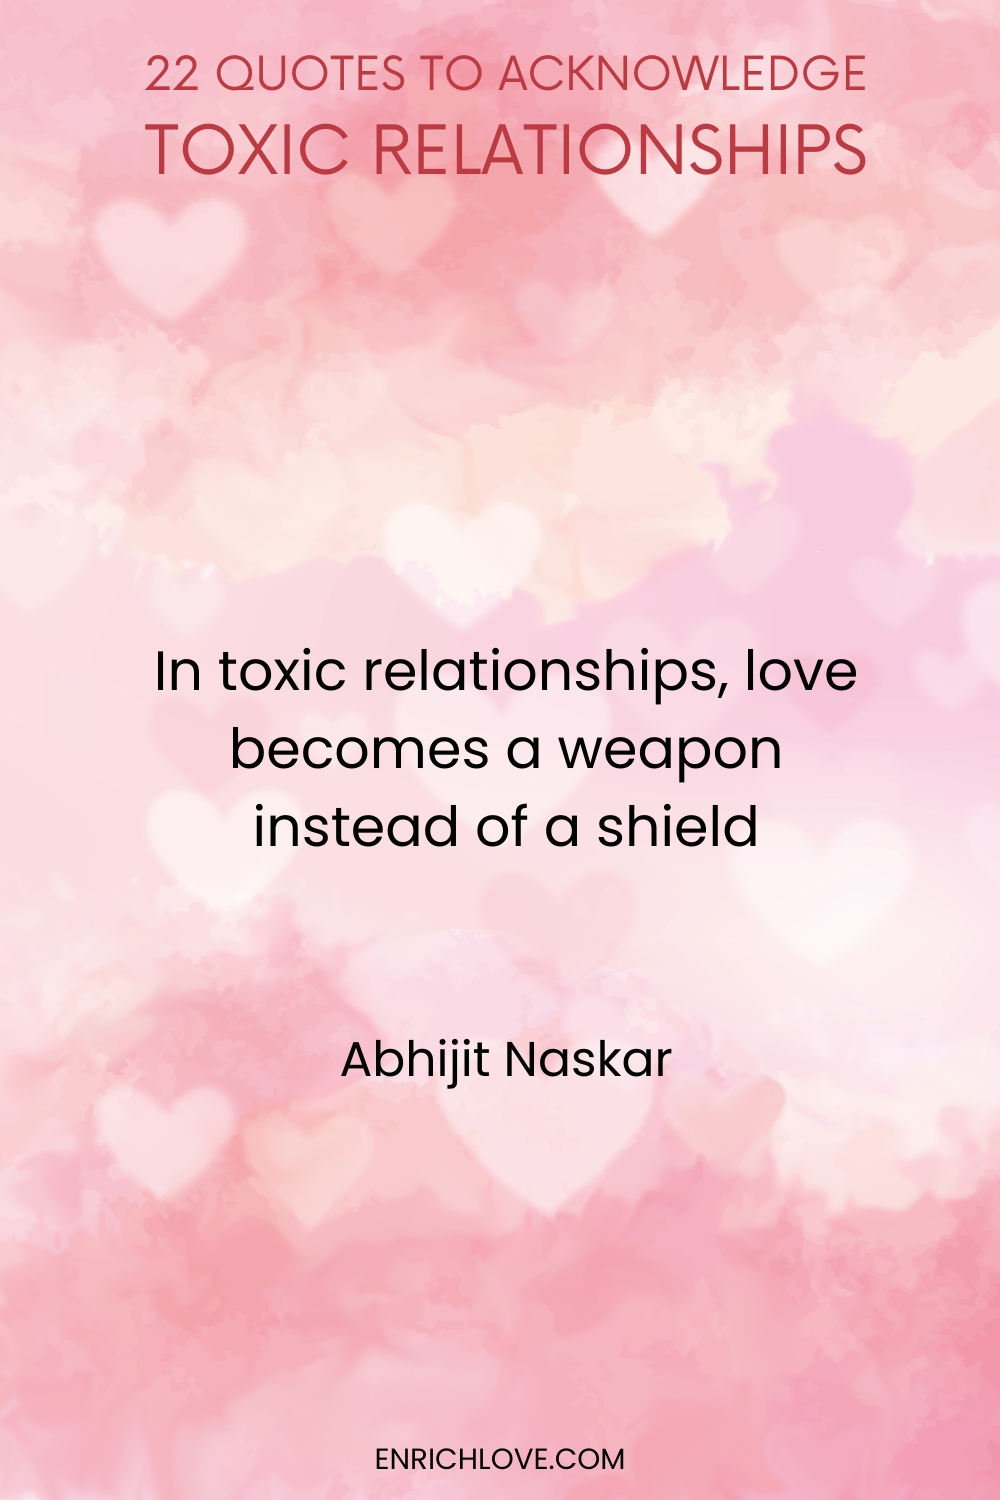 22 Quotes to Acknowledge Toxic Relationships -In toxic relationships, love becomes a weapon instead of a shield by Abhijit Naskar